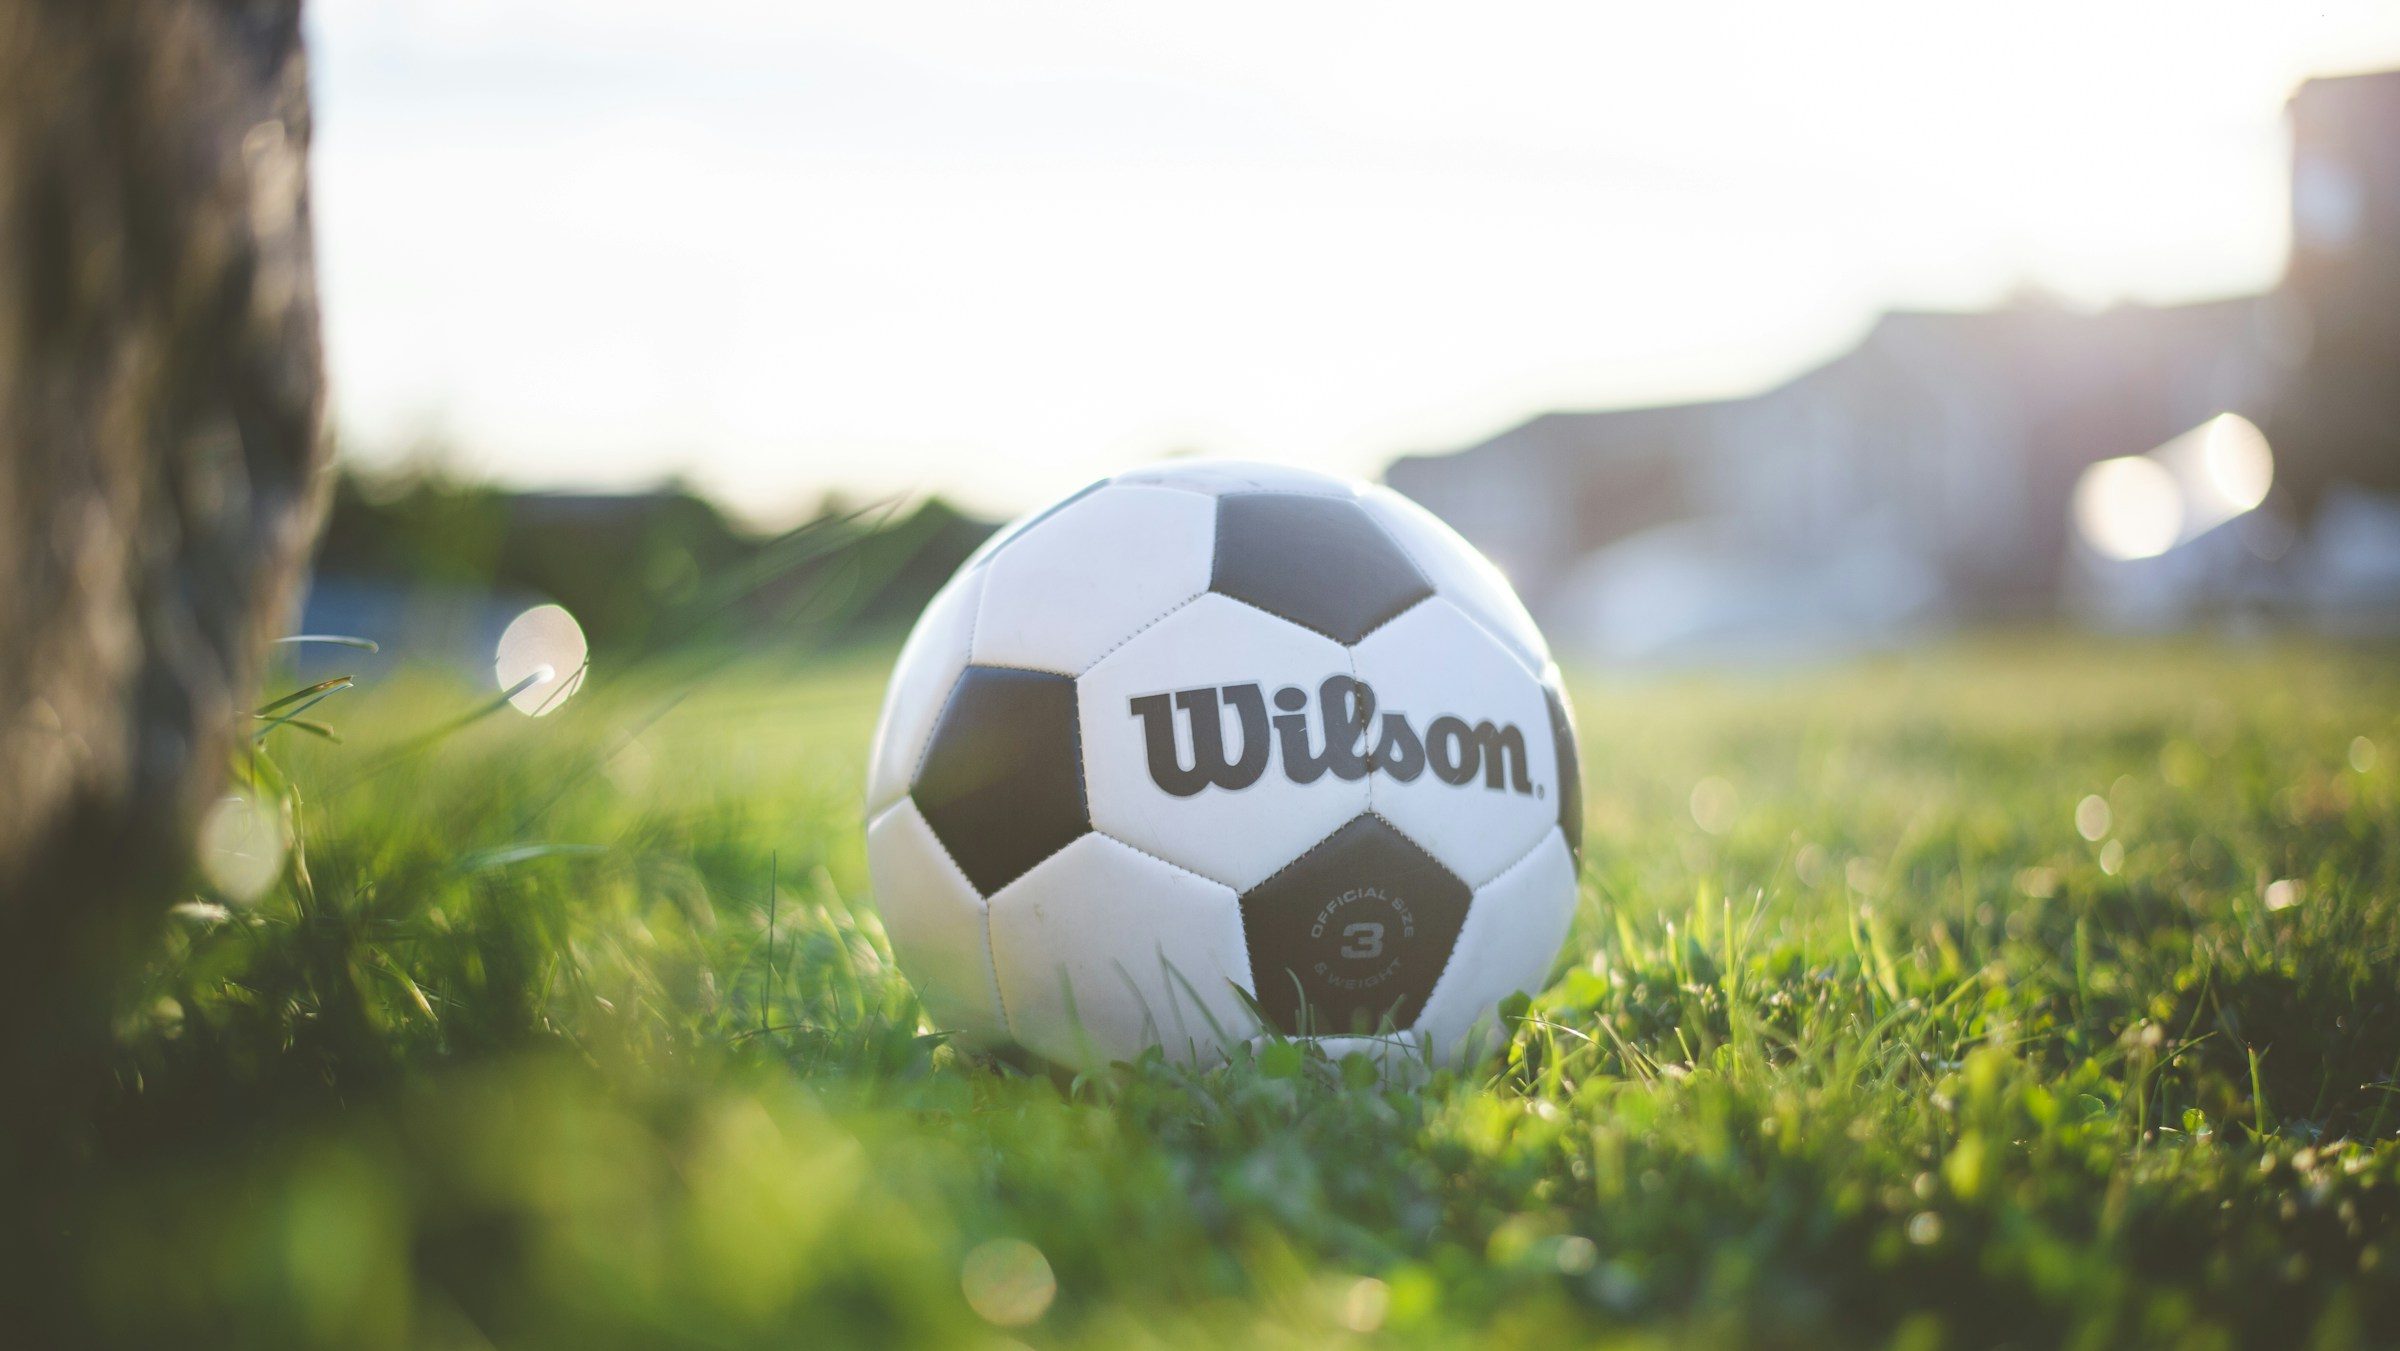 Wilson soccer ball in a field on a sunny day